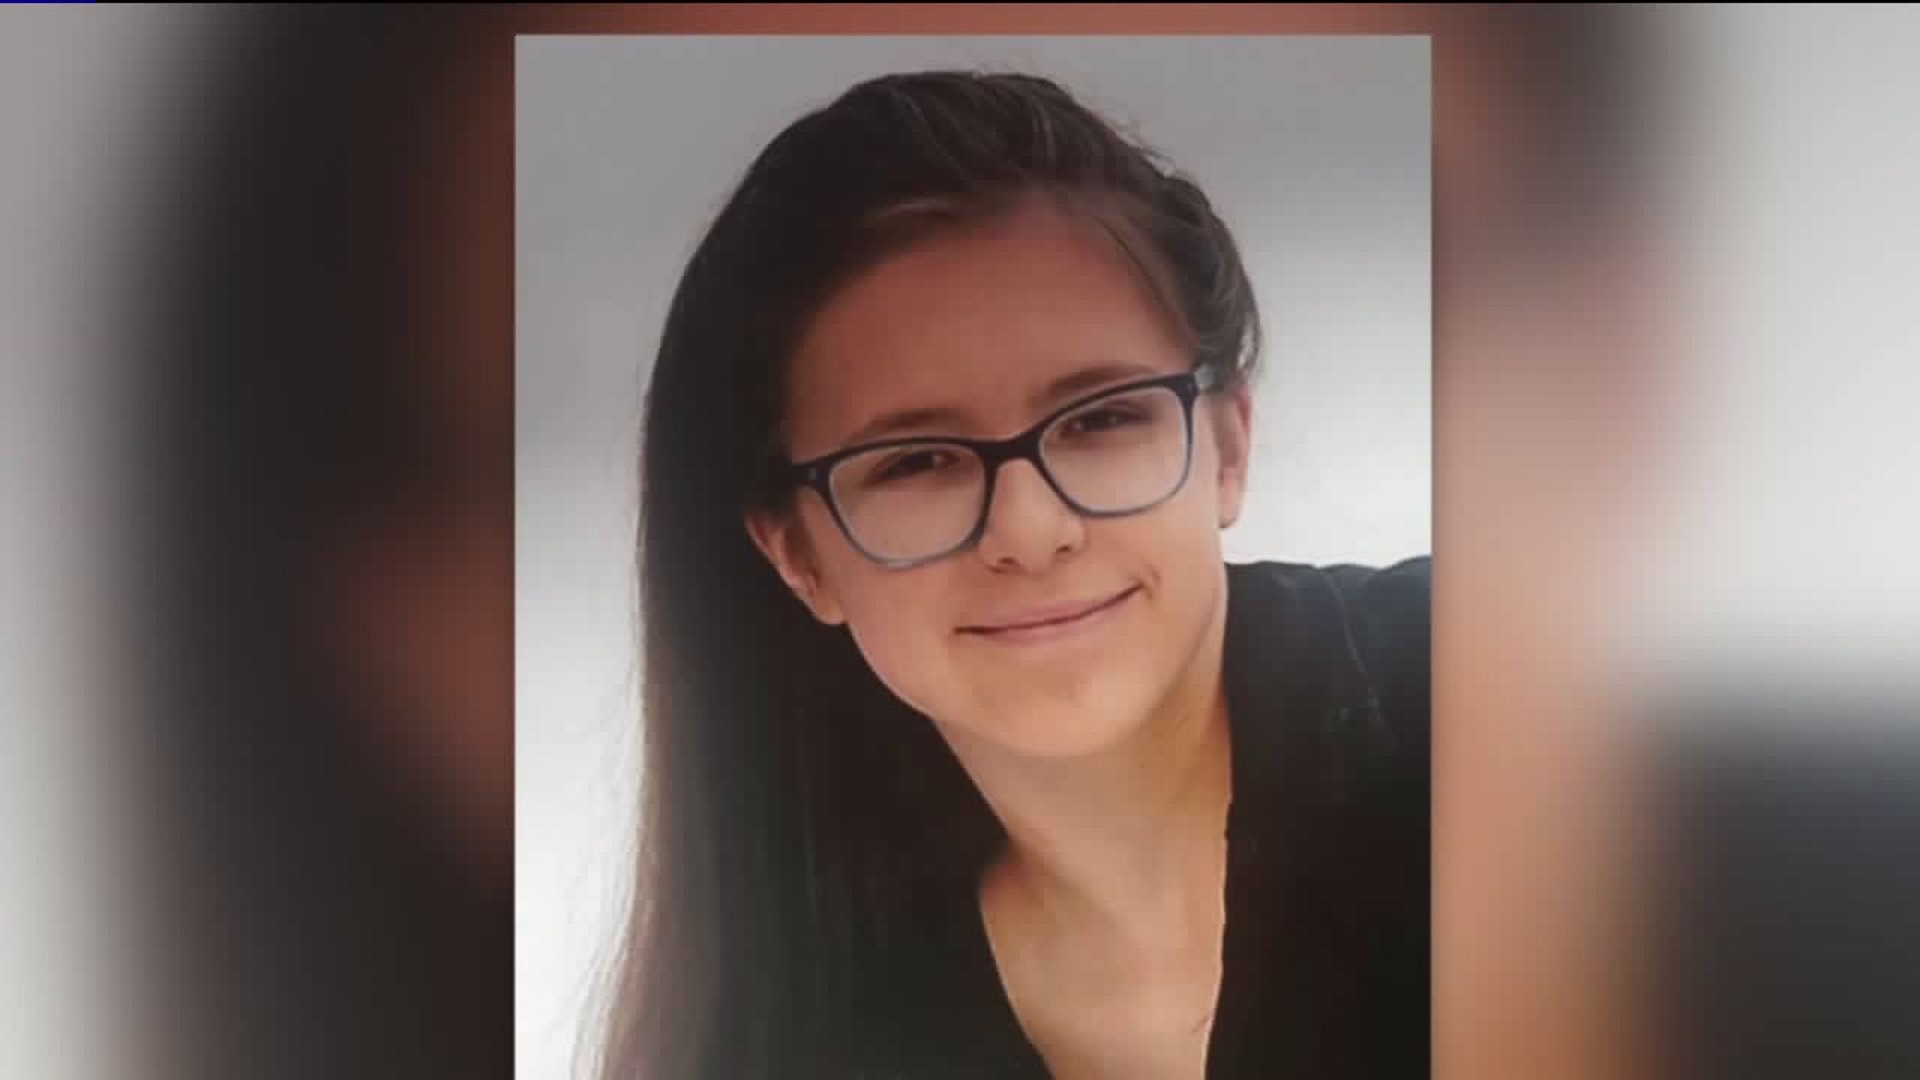 Community Rallying Behind 11-Year-Old Girl Hit by a Car